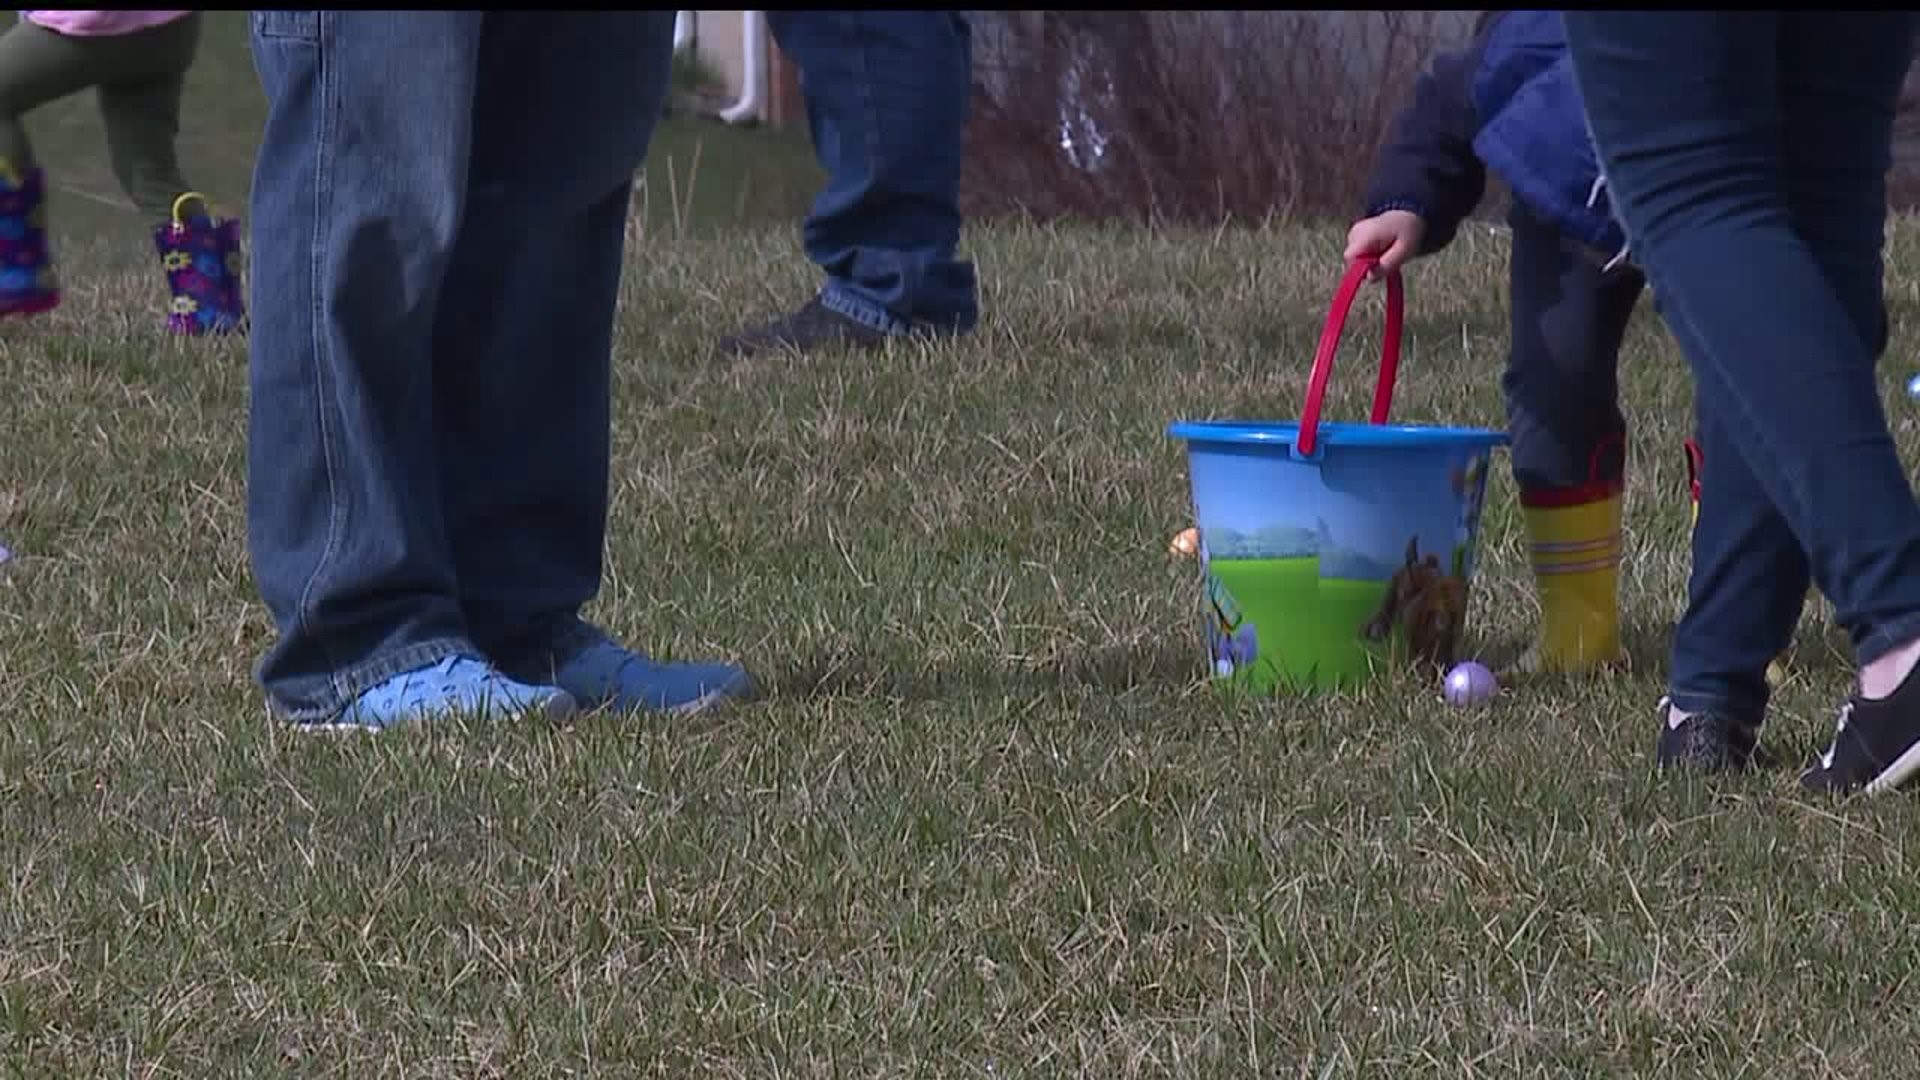 Annual Easter egg hunt held in York county